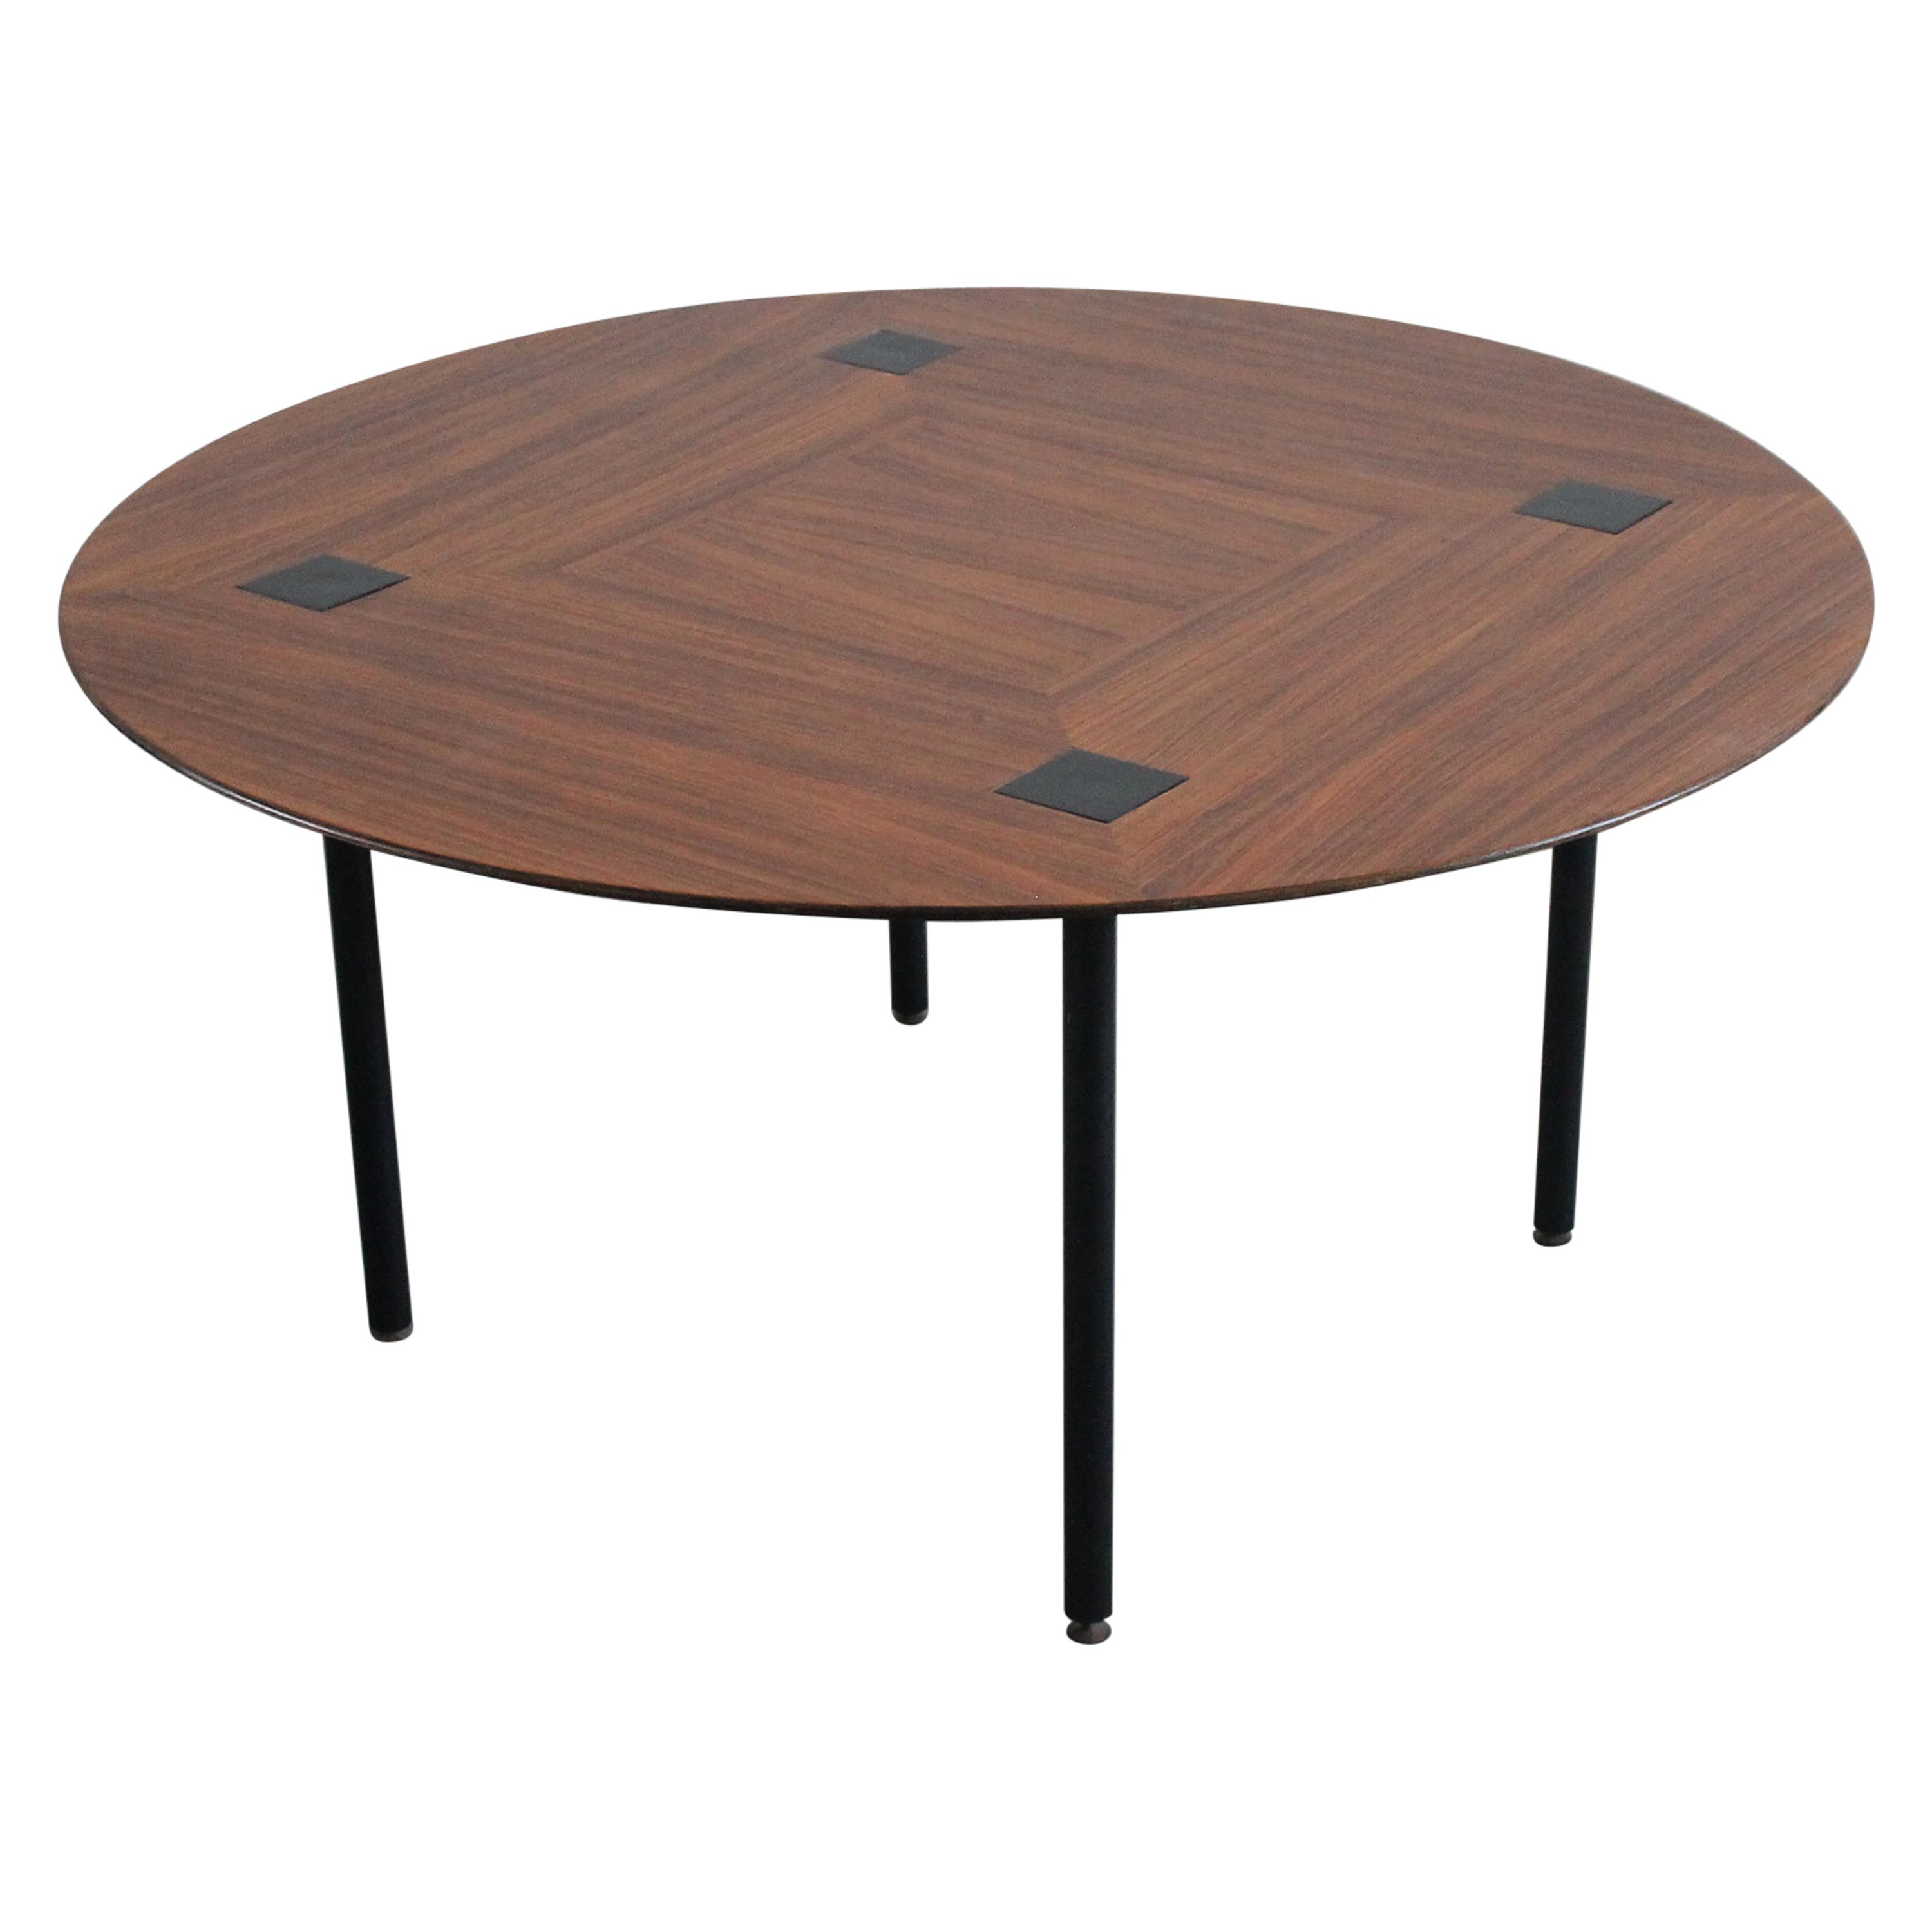 Ettore Sottsass T72 Round Table in Wood and Brass by Poltronova 1950s For Sale